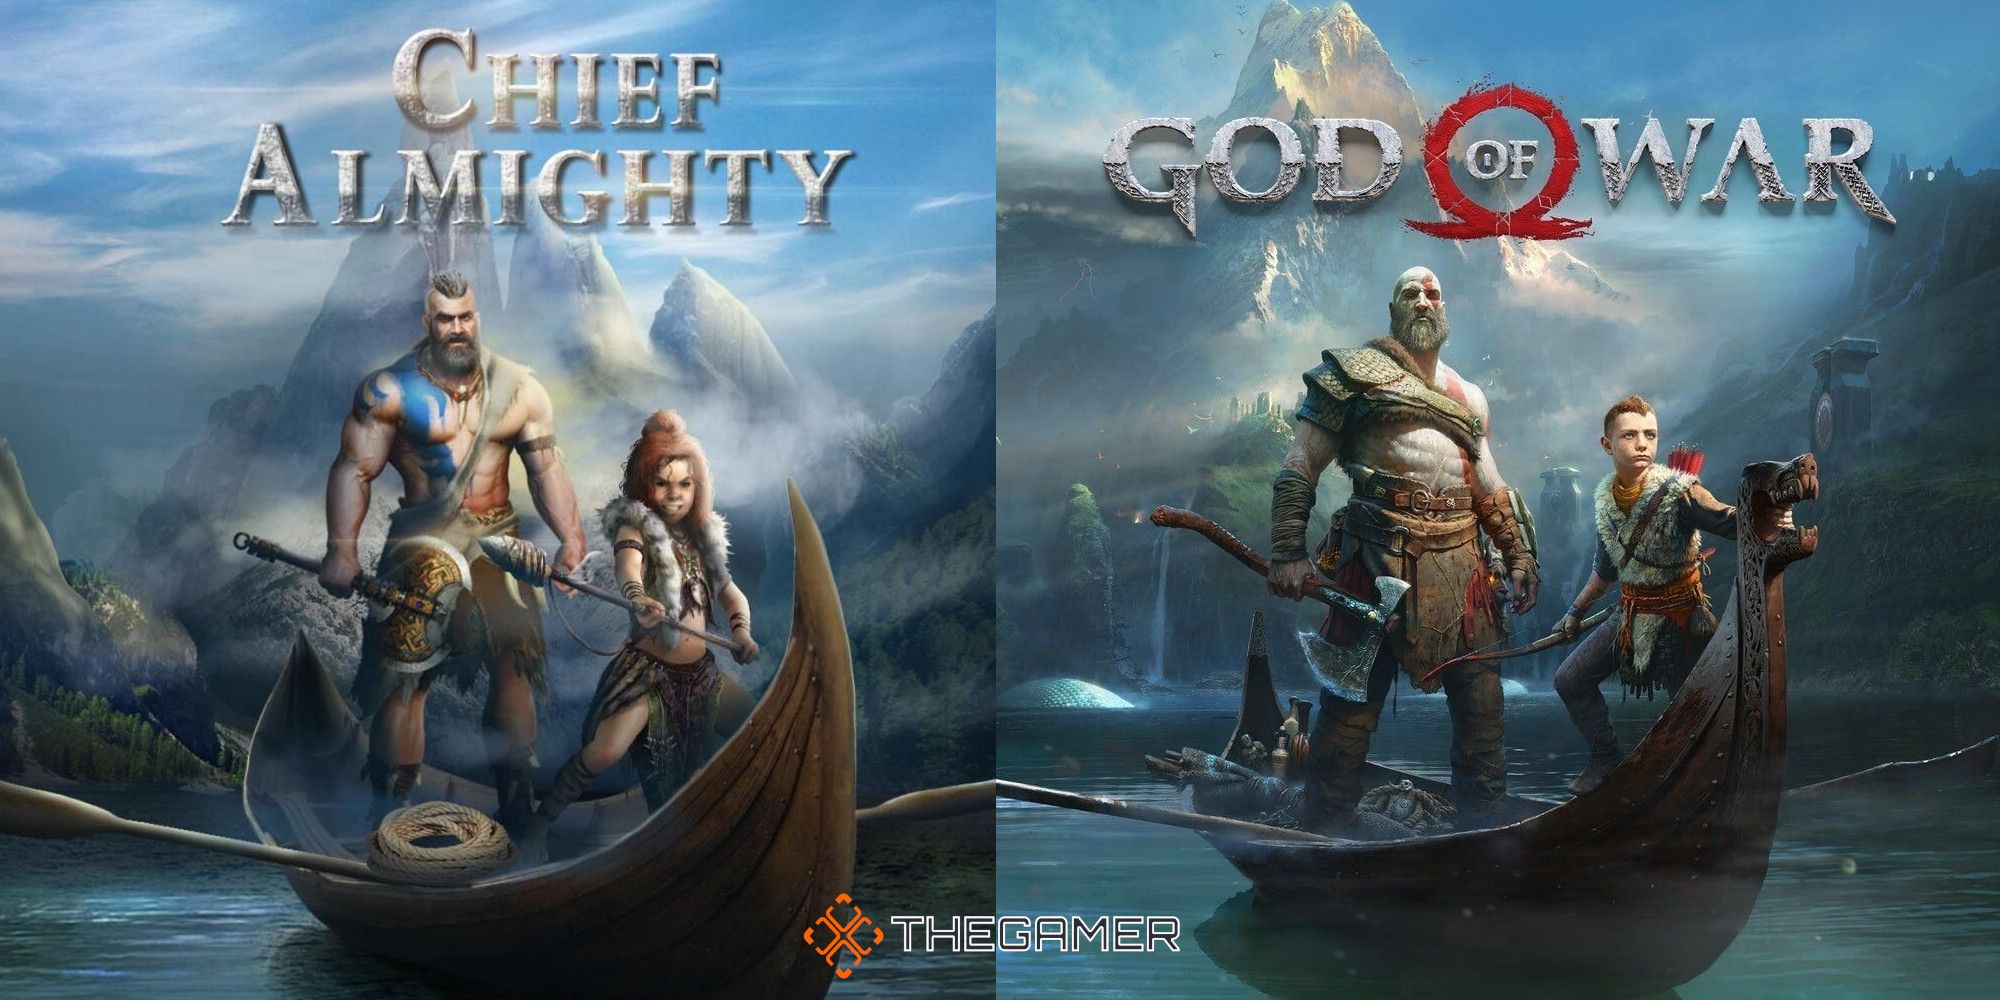 Chief almight x god of war - a split image of the two posters that look almost identical